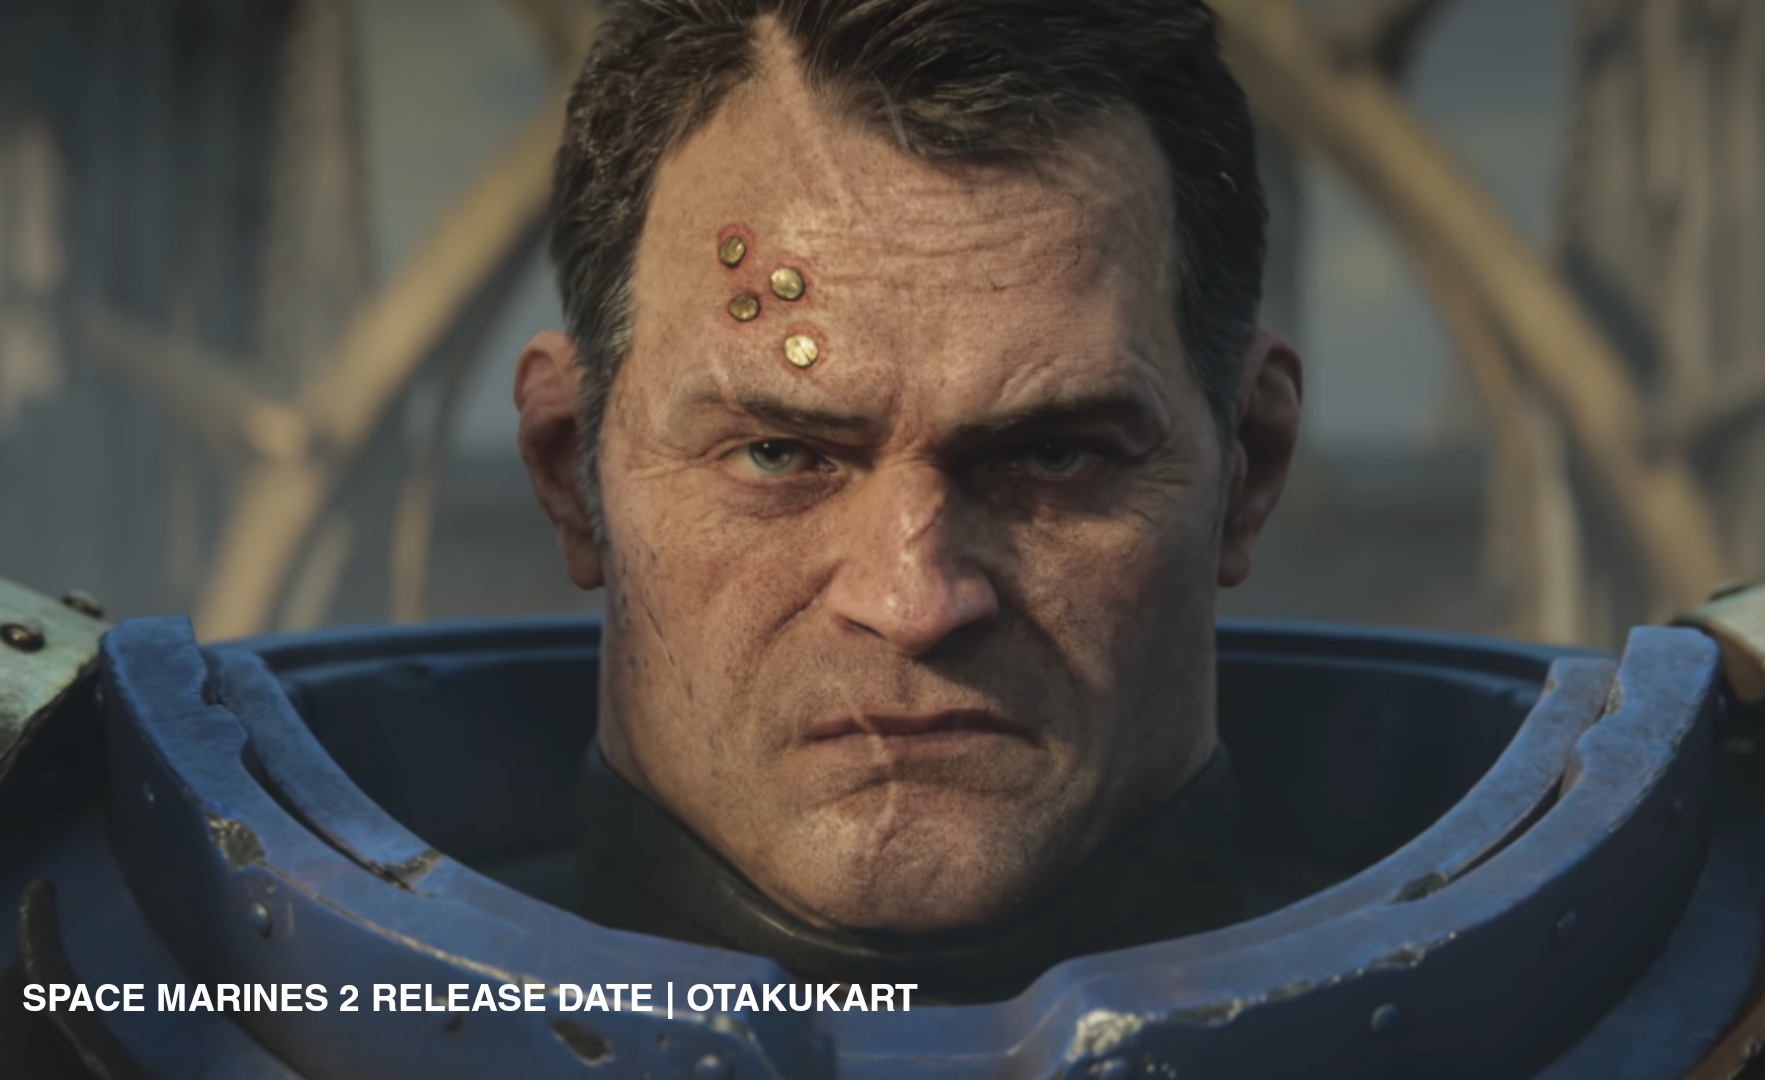 Space Marines 2 Release Date